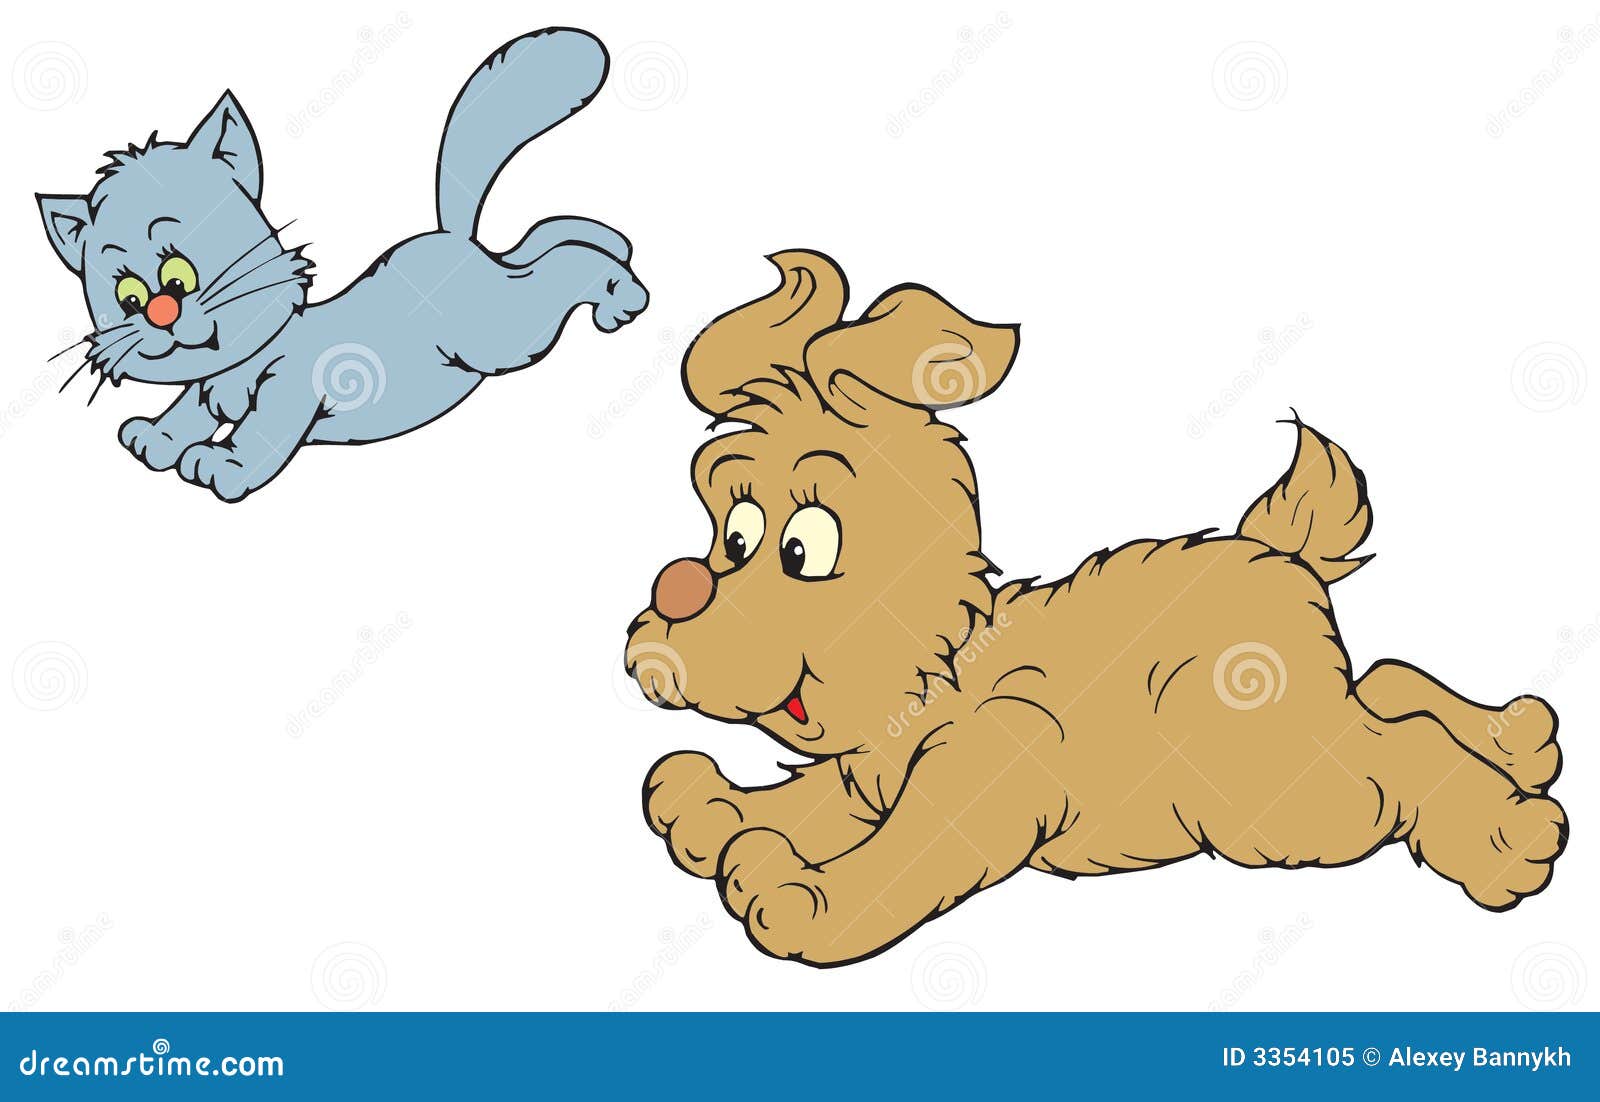 free clipart dogs and cats - photo #44